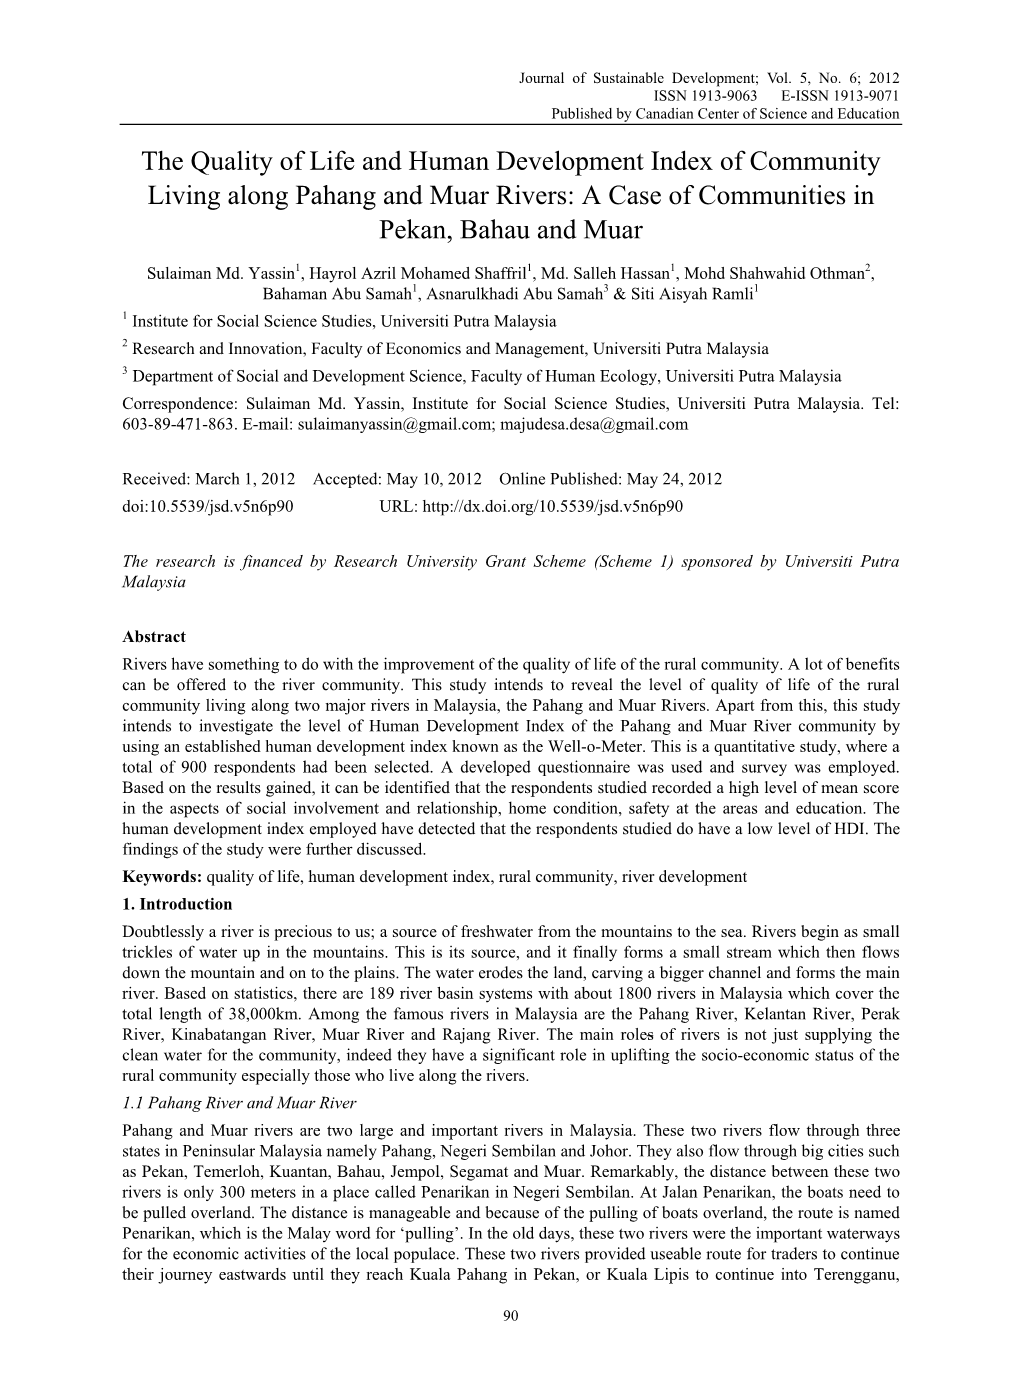 The Quality of Life and Human Development Index of Community Living Along Pahang and Muar Rivers: a Case of Communities in Pekan, Bahau and Muar